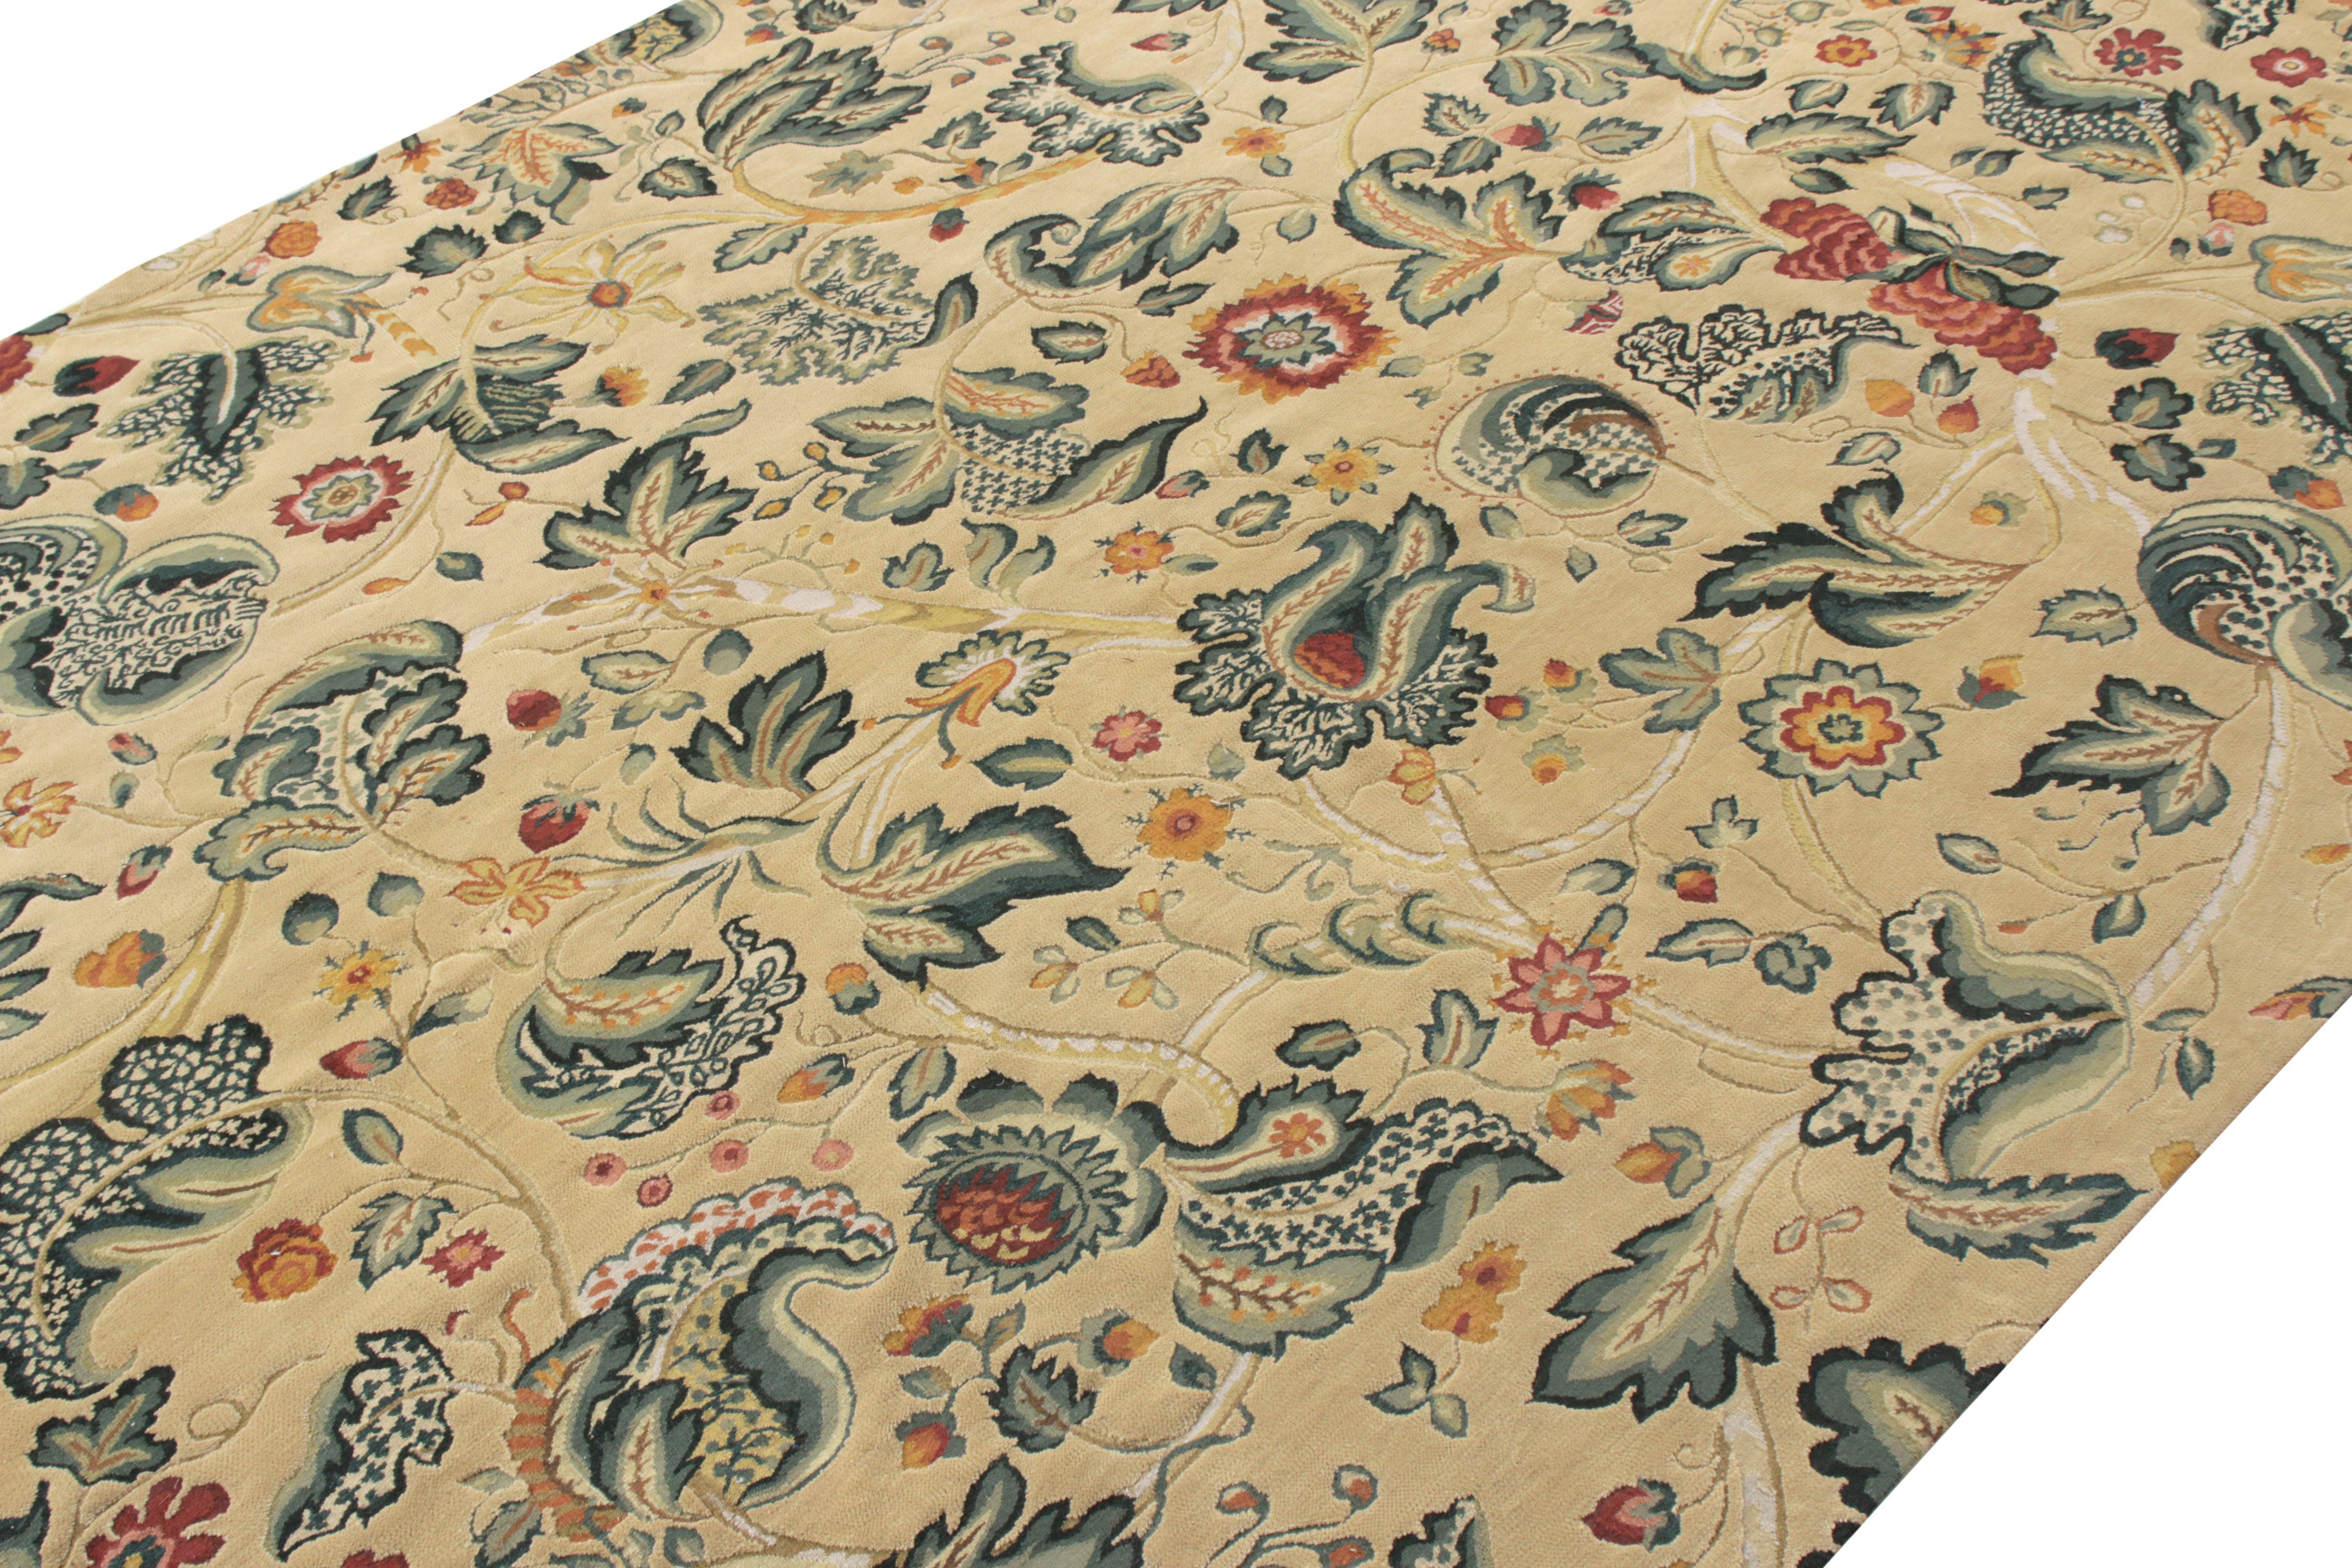 Hand-Knotted Rug & Kilim’s Tudor Style Gallery Rug in Cream, Green All over Floral Pattern For Sale